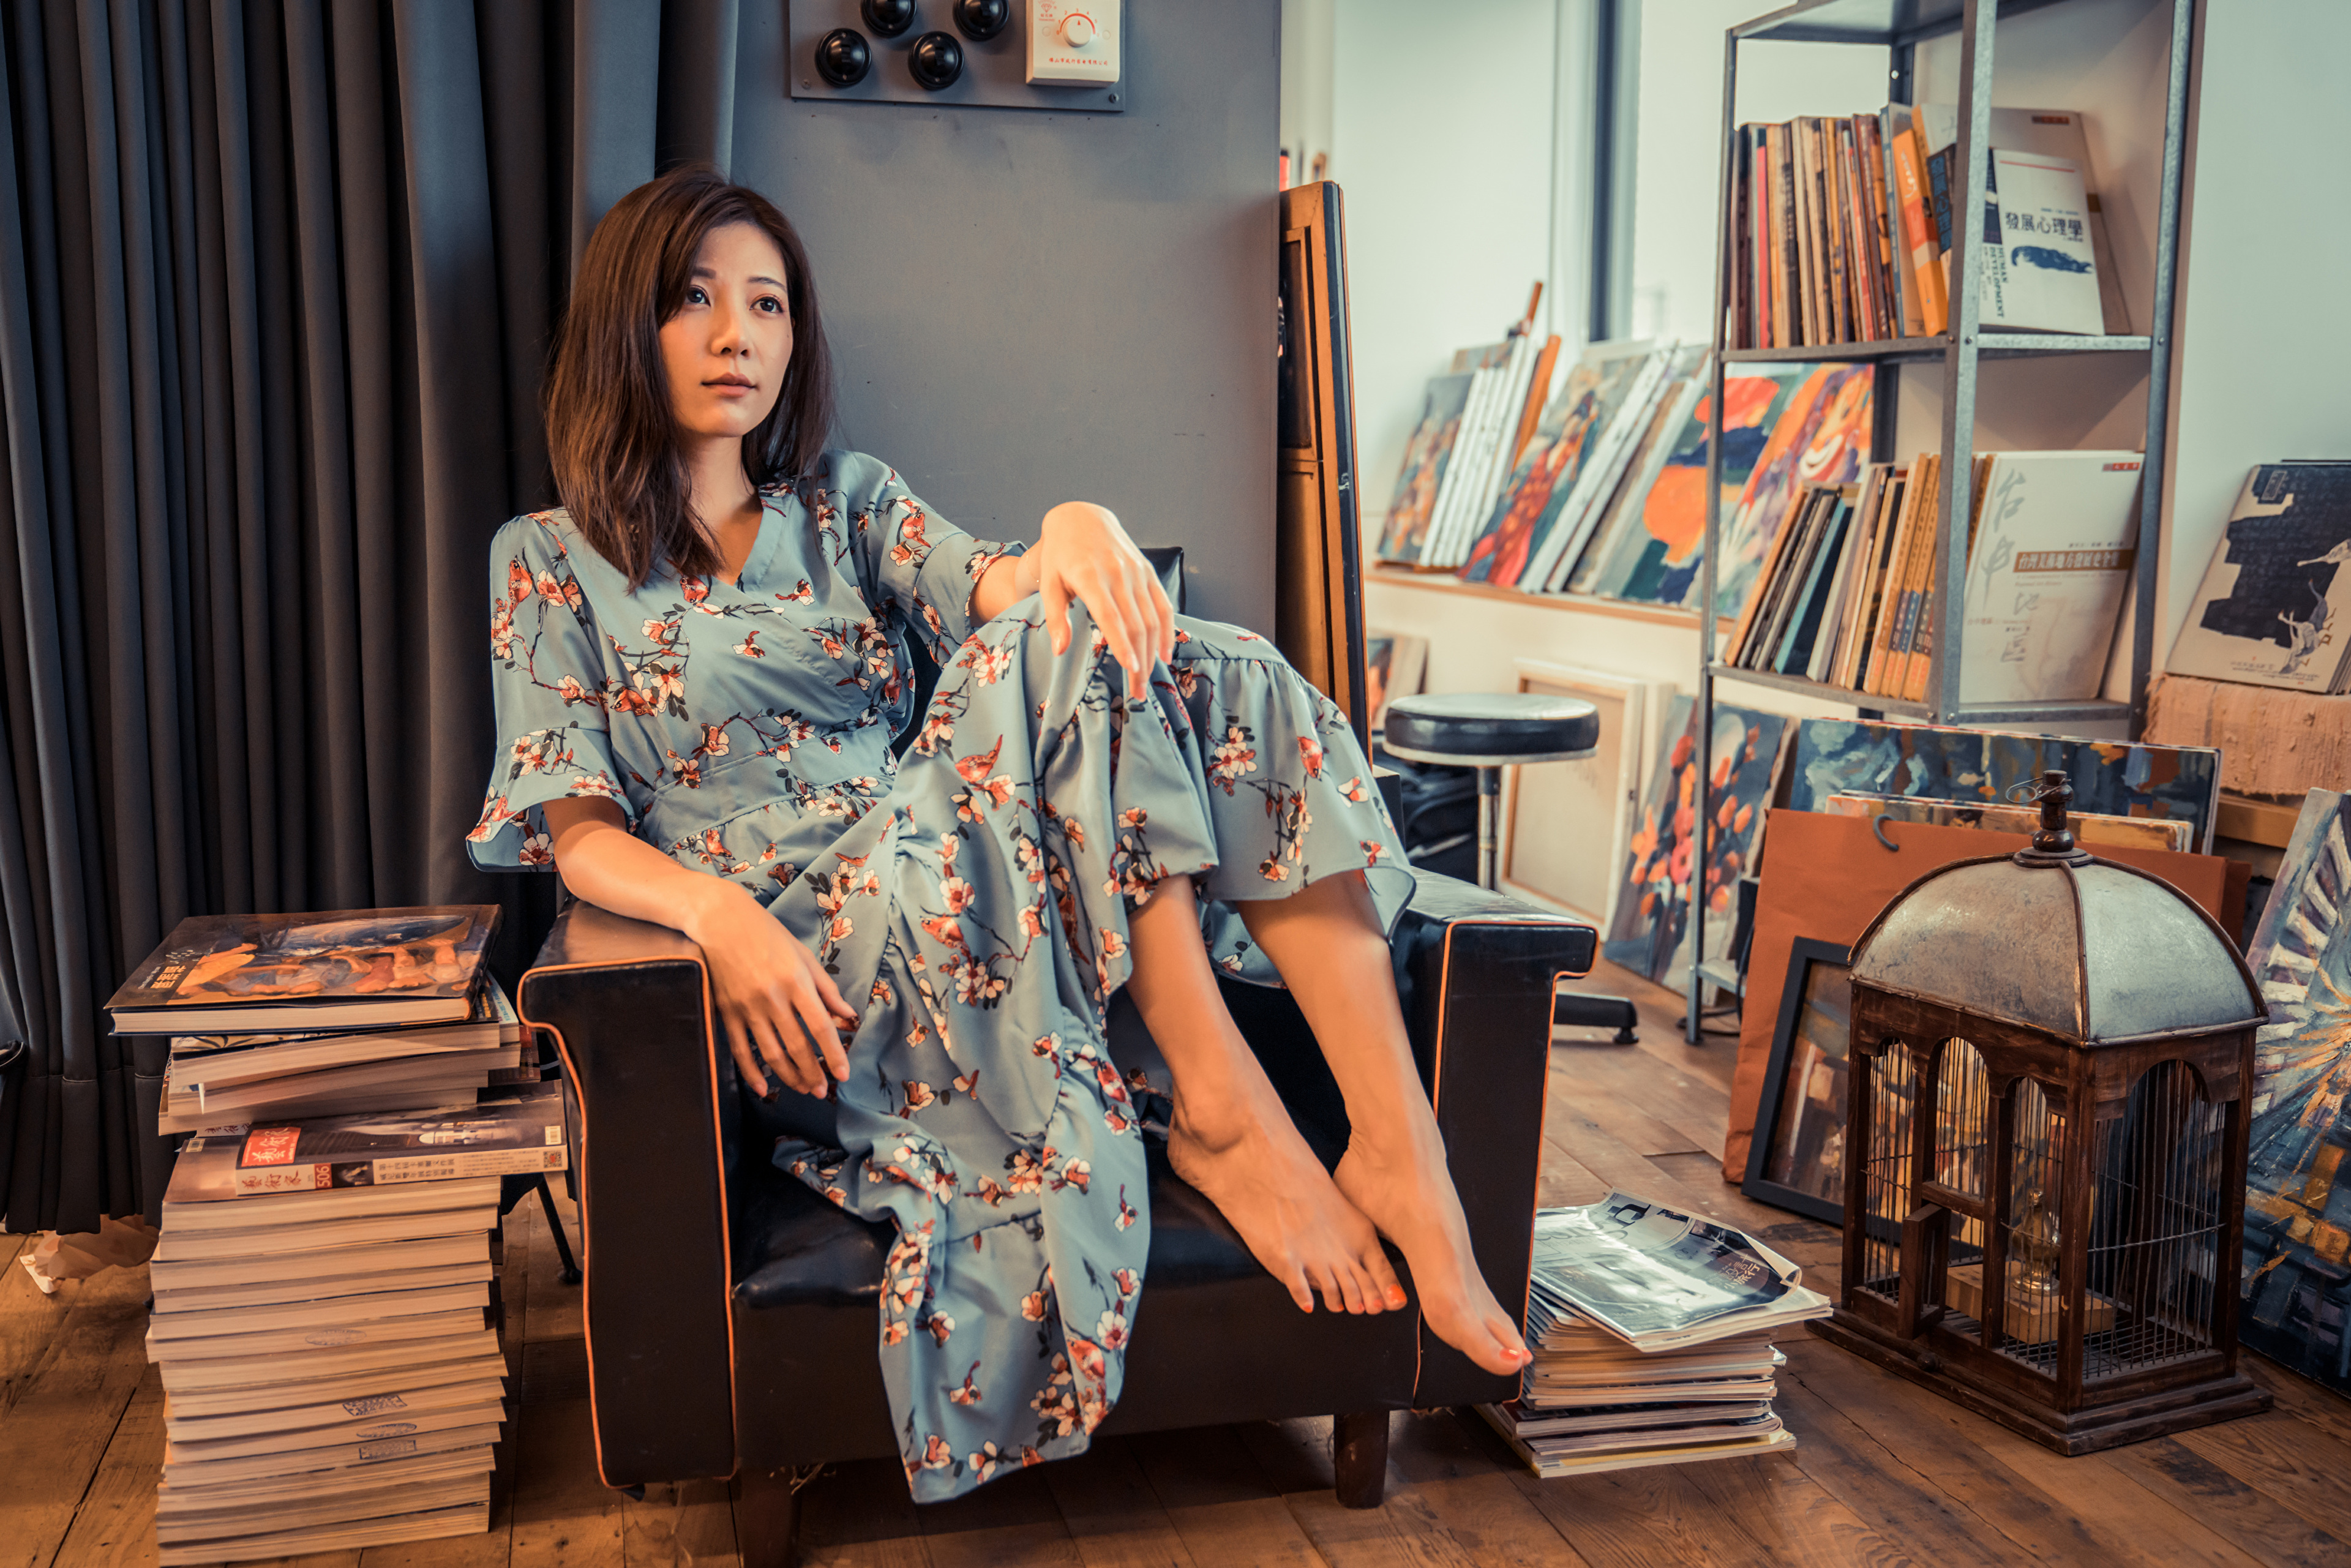 People 3840x2561 Asian model women long hair dark hair depth of field sitting barefoot flower dress chair books magazine shelves painting curtains cages